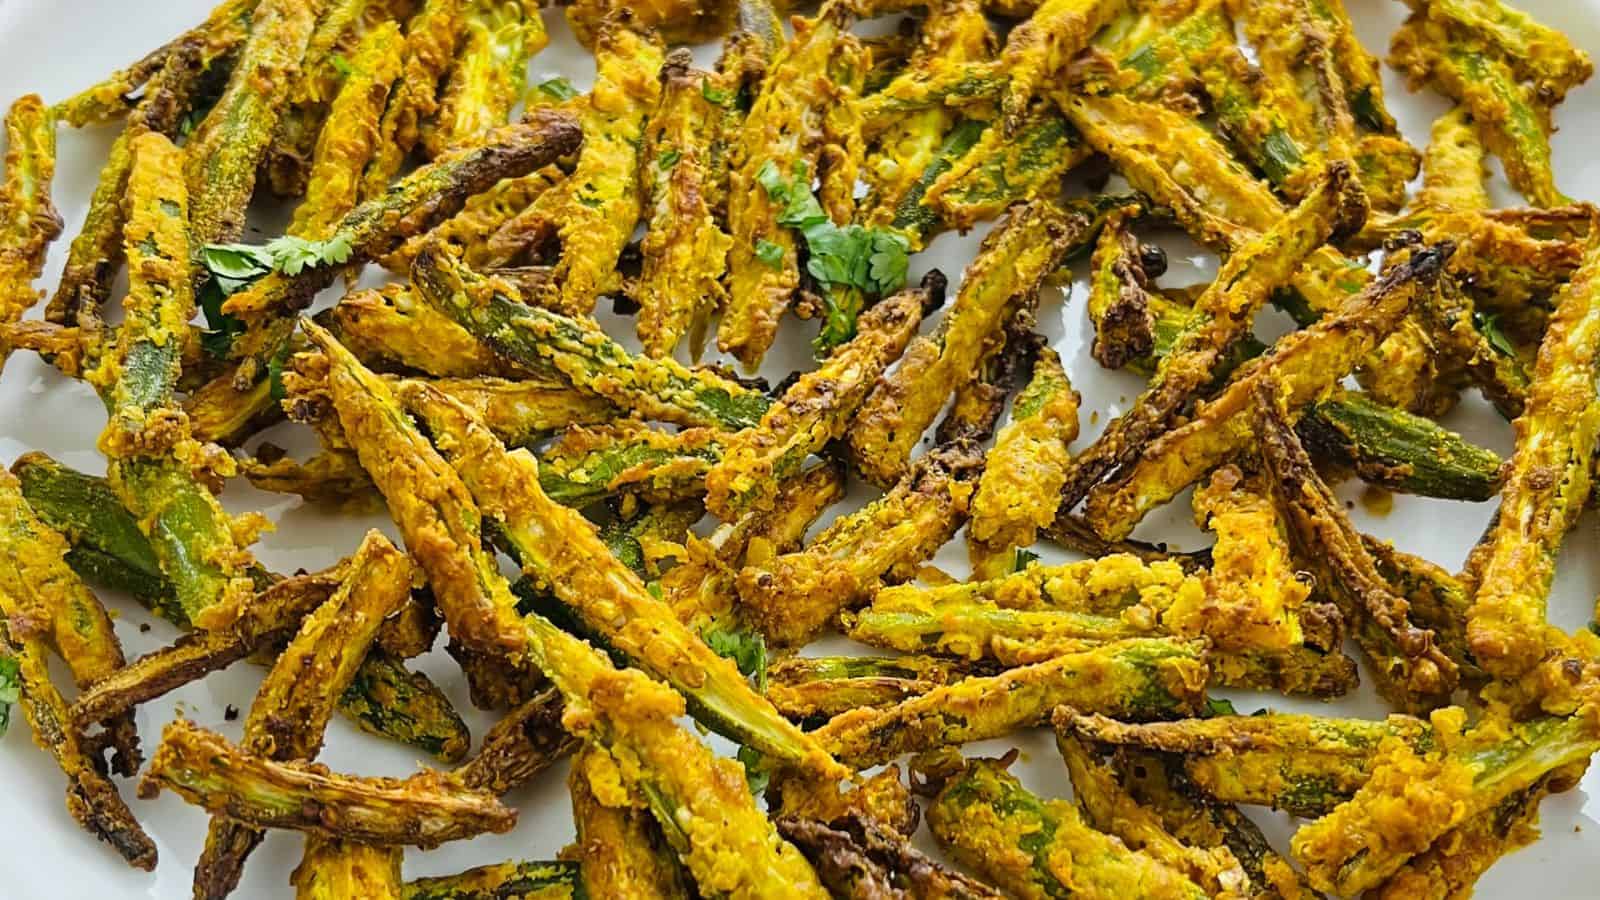 A plate of crispy, golden-fried okra seasoned with spices and garnished with a few cilantro leaves.